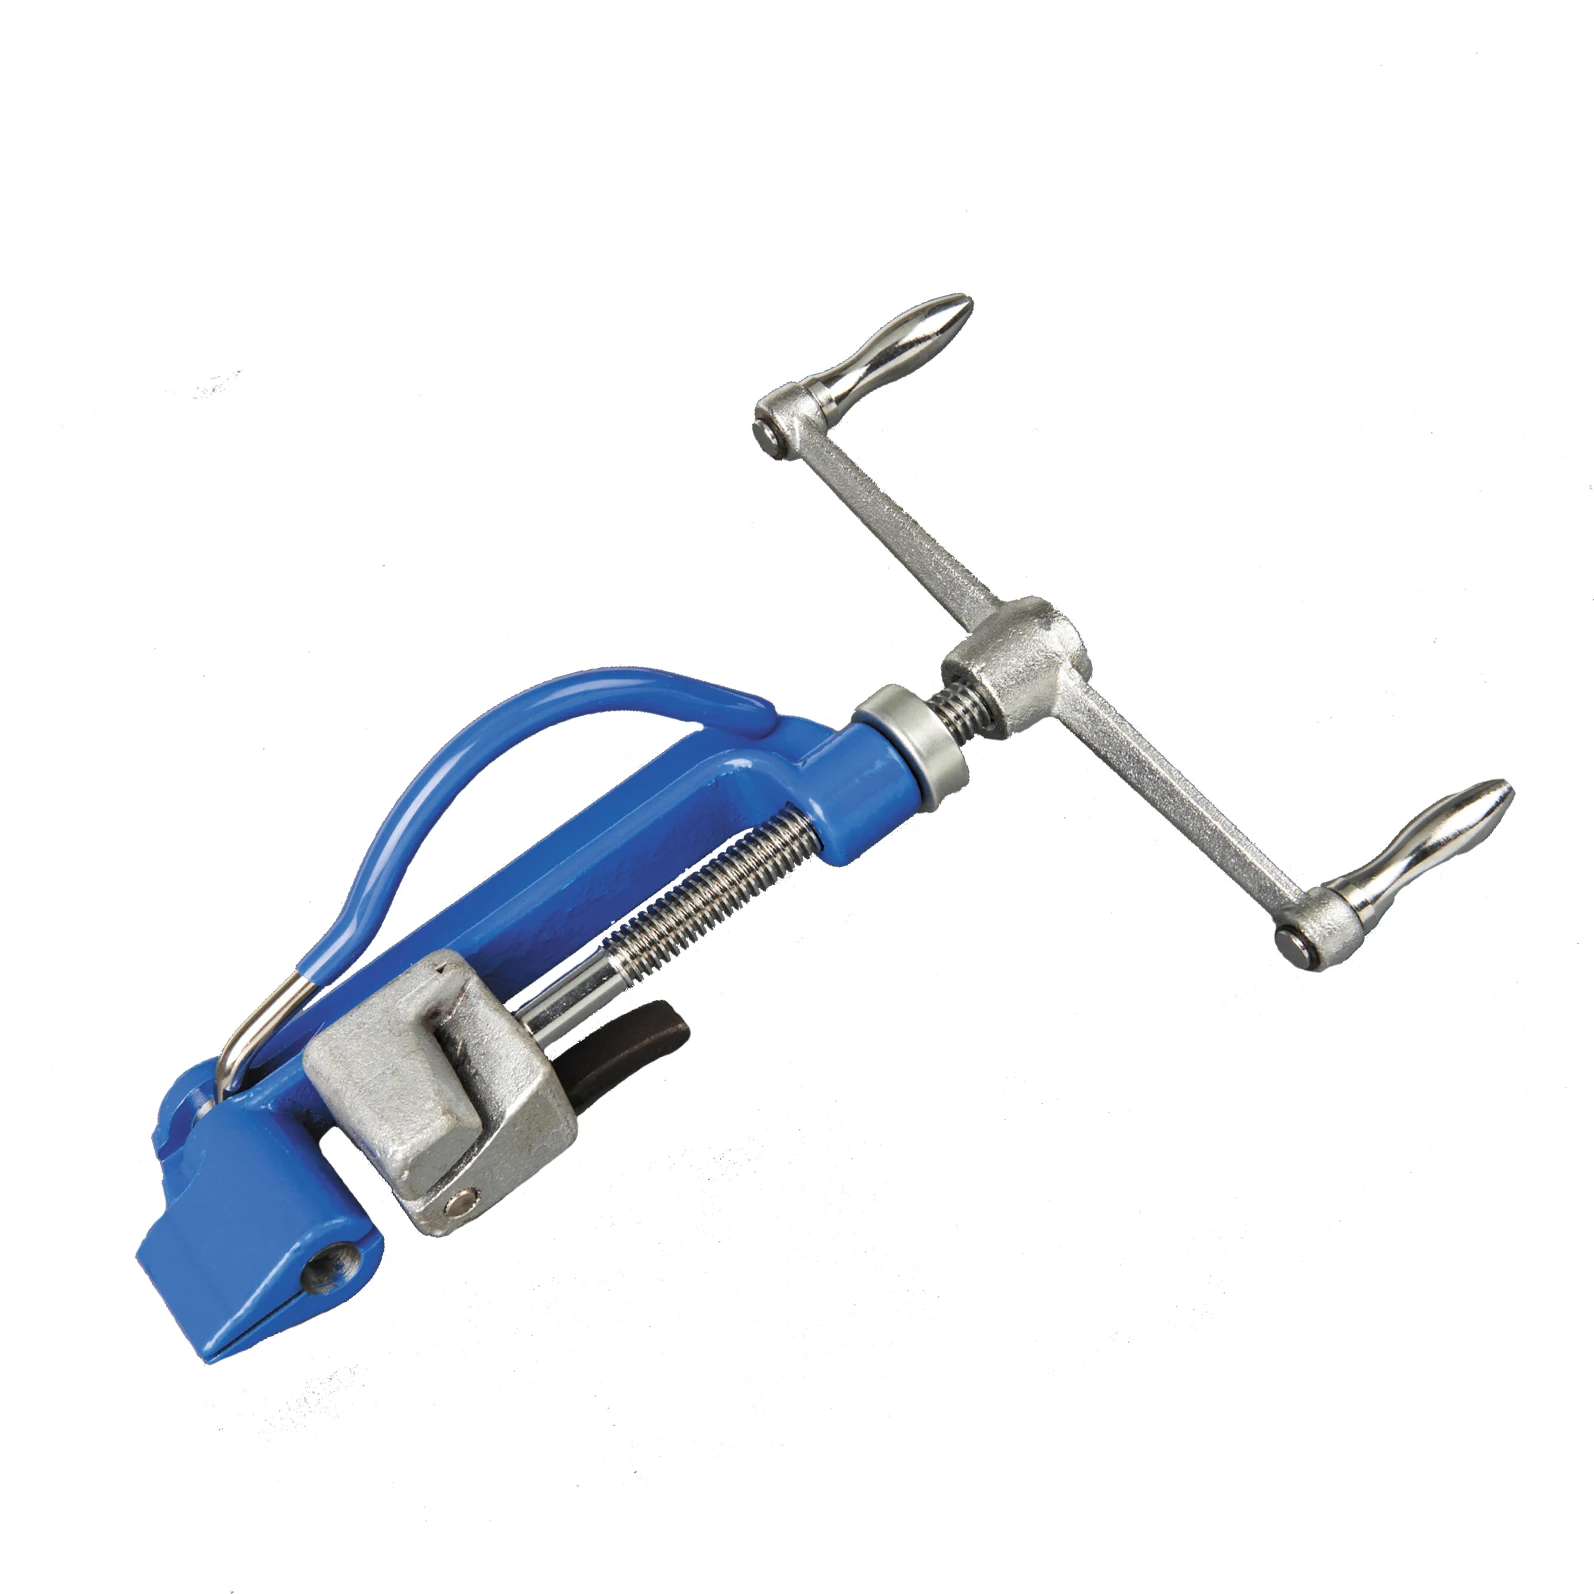 Details about   Manual Stainless Package Strapping Machine Tensioning Tool cable tie tool 1pc 